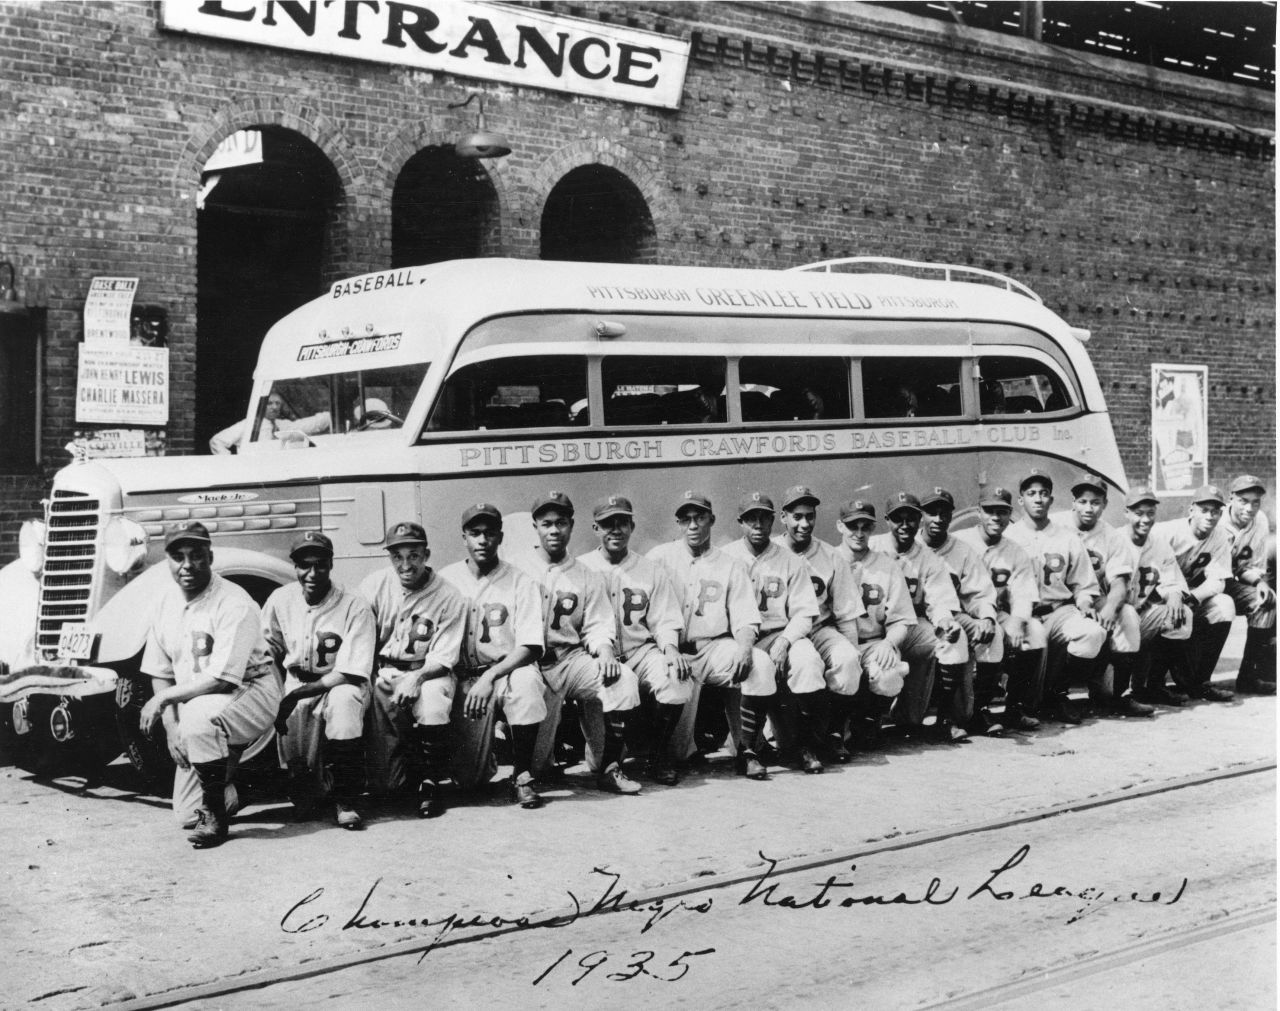 Here, the 1935 Negro Leagues Pittsburgh Crawfords pose in front of their team bus, similar to the bus the Anderson Monarchs are traveling in across the United States. 